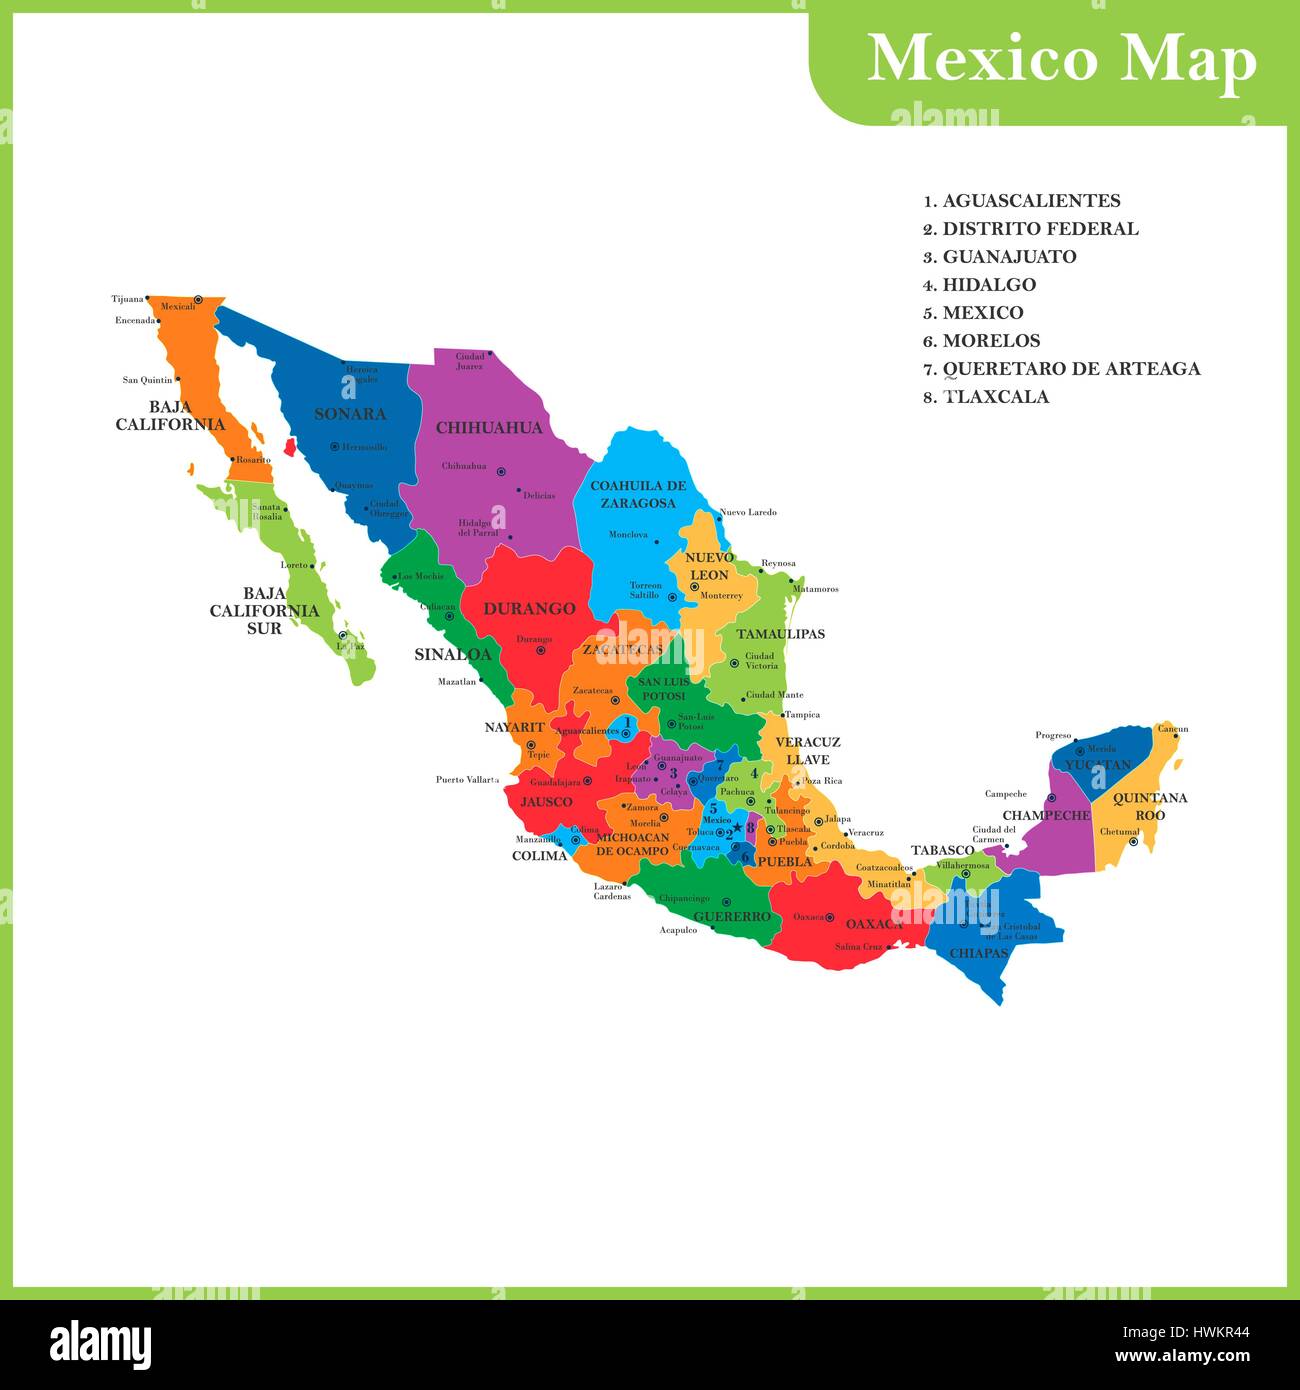 The Detailed Map Of The Mexico With Regions Or States And Cities